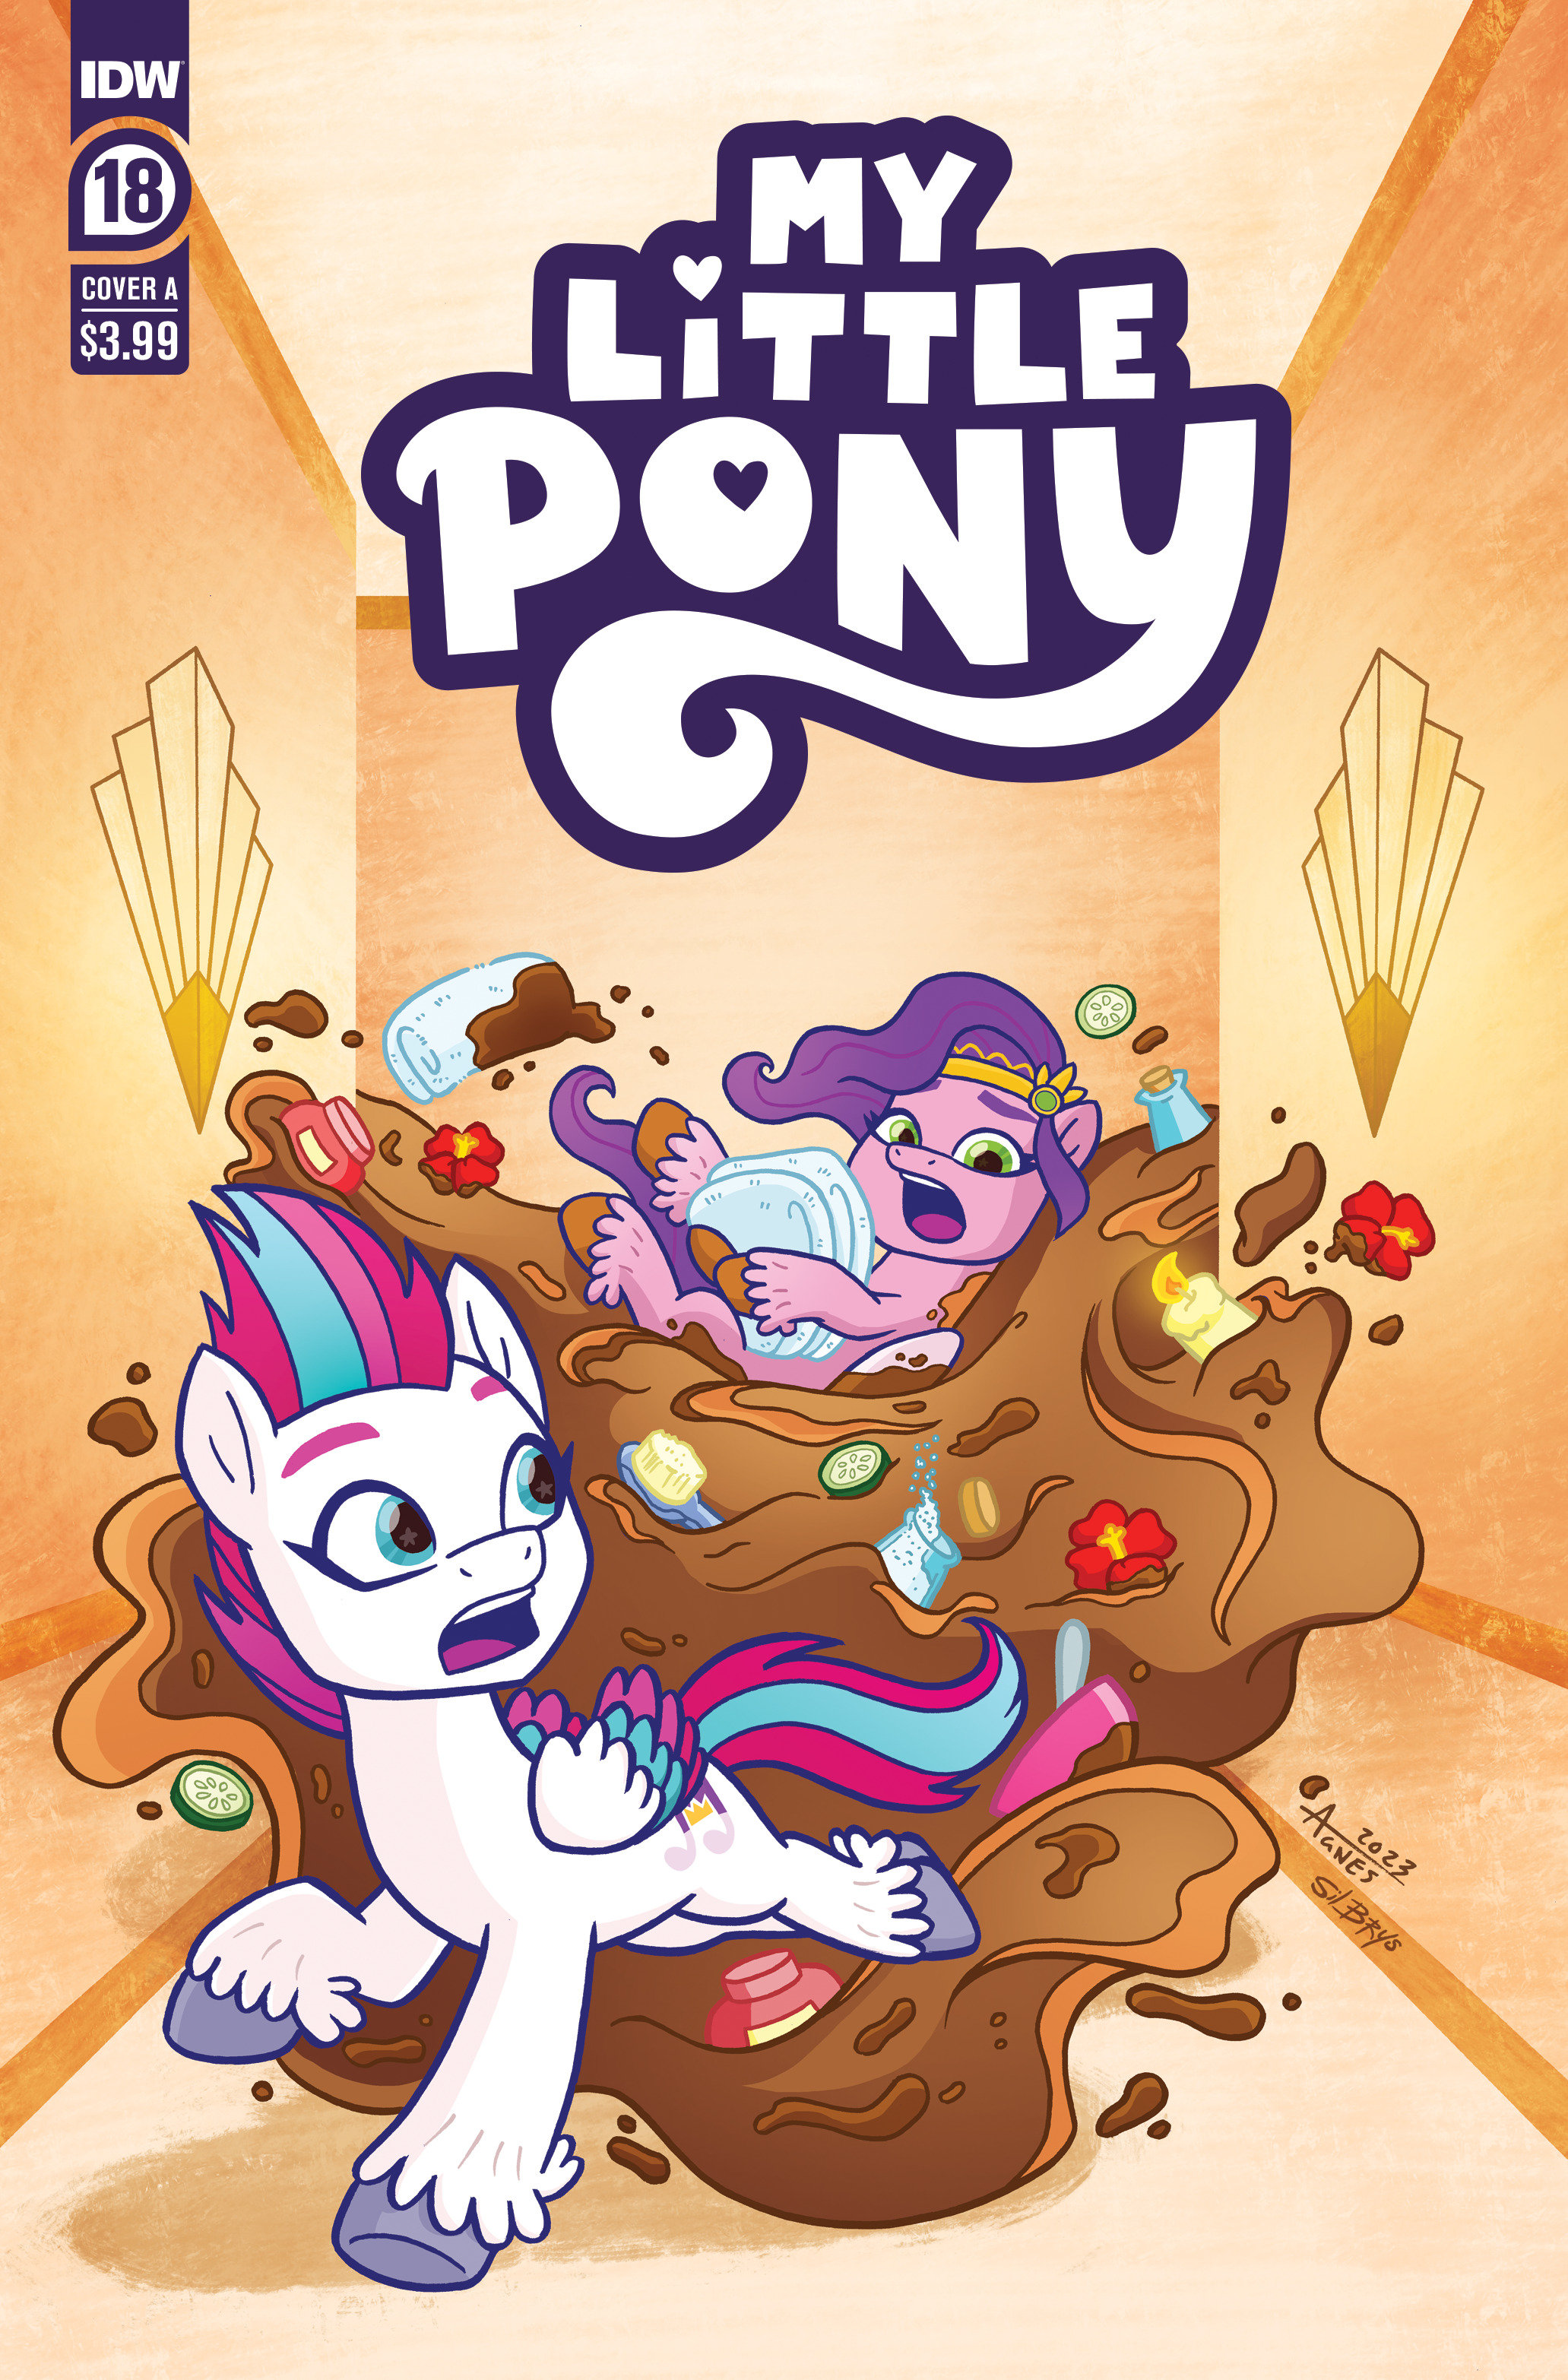 My Little Pony #18 Cover A Garbowska